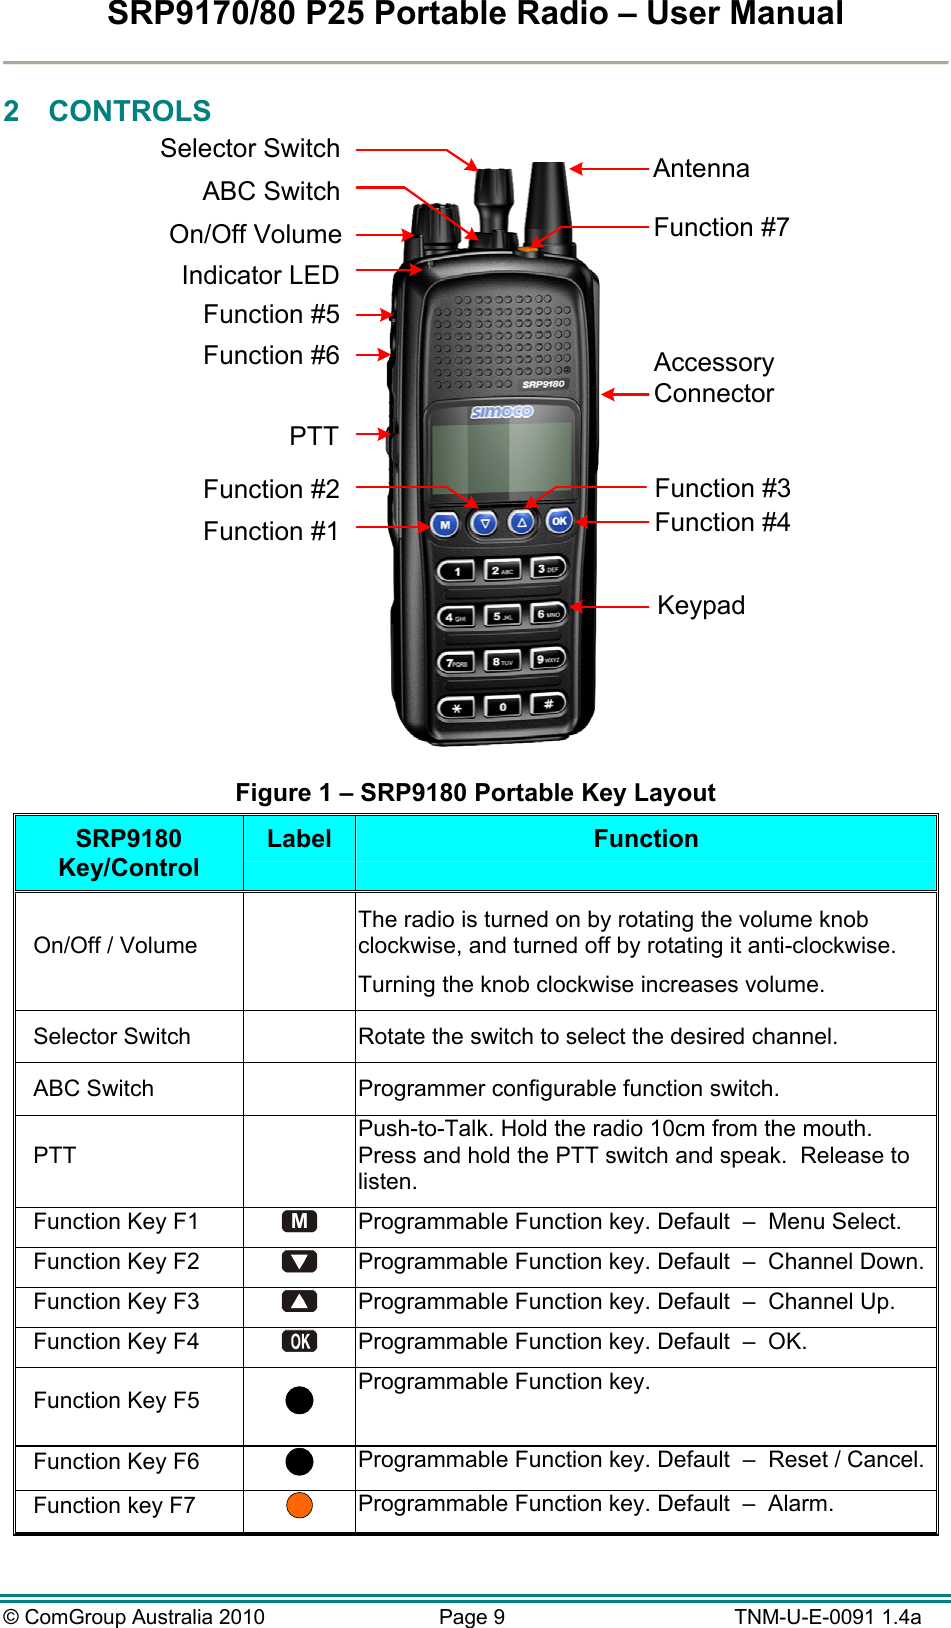 SRP9170/80 P25 Portable Radio – User Manual  © ComGroup Australia 2010  Page 9   TNM-U-E-0091 1.4a 2 CONTROLS Accessory ConnectorFunction #7Selector SwitchABC SwitchOn/Off VolumePTTFunction #5Function #6Function #2Function #1Function #3Function #4AntennaKeypadIndicator LED Figure 1 – SRP9180 Portable Key Layout SRP9180 Key/Control Label  Function On/Off / Volume   The radio is turned on by rotating the volume knob clockwise, and turned off by rotating it anti-clockwise. Turning the knob clockwise increases volume. Selector Switch   Rotate the switch to select the desired channel. ABC Switch   Programmer configurable function switch. PTT  Push-to-Talk. Hold the radio 10cm from the mouth. Press and hold the PTT switch and speak.  Release to listen. Function Key F1 M Programmable Function key. Default  –  Menu Select. Function Key F2   Programmable Function key. Default  –  Channel Down.Function Key F3   Programmable Function key. Default  –  Channel Up. Function Key F4   Programmable Function key. Default  –  OK. Function Key F5   Programmable Function key.  Function Key F6   Programmable Function key. Default  –  Reset / Cancel.Function key F7   Programmable Function key. Default  –  Alarm. 